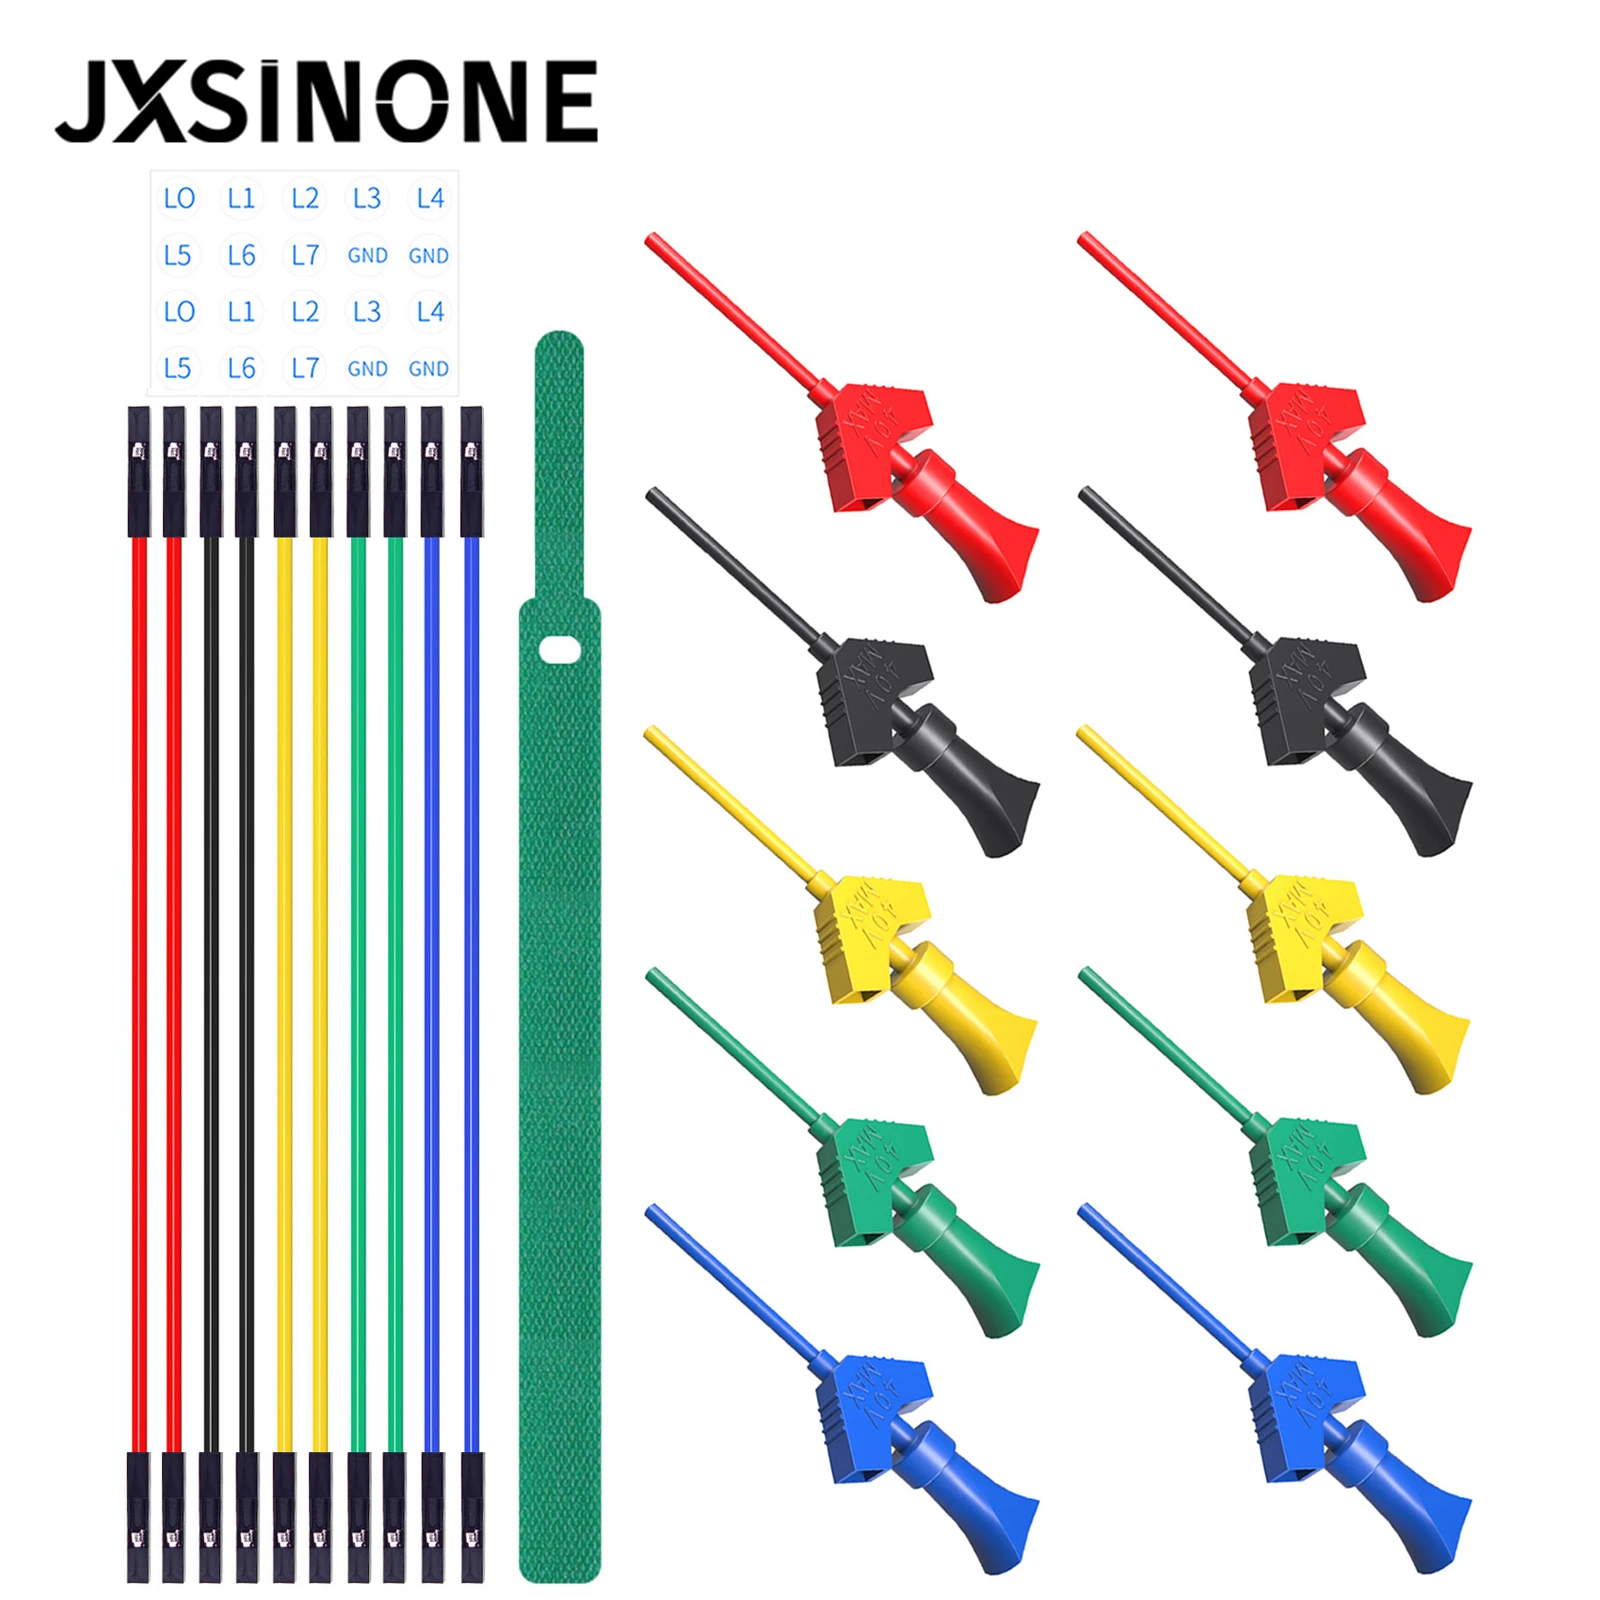 JXSINONE P1512D Mini Grabber SMD IC Test Hook Clip Jumper Probe Test Lead Kit Silicone Soft Dupont Cable for Logic Analyzer